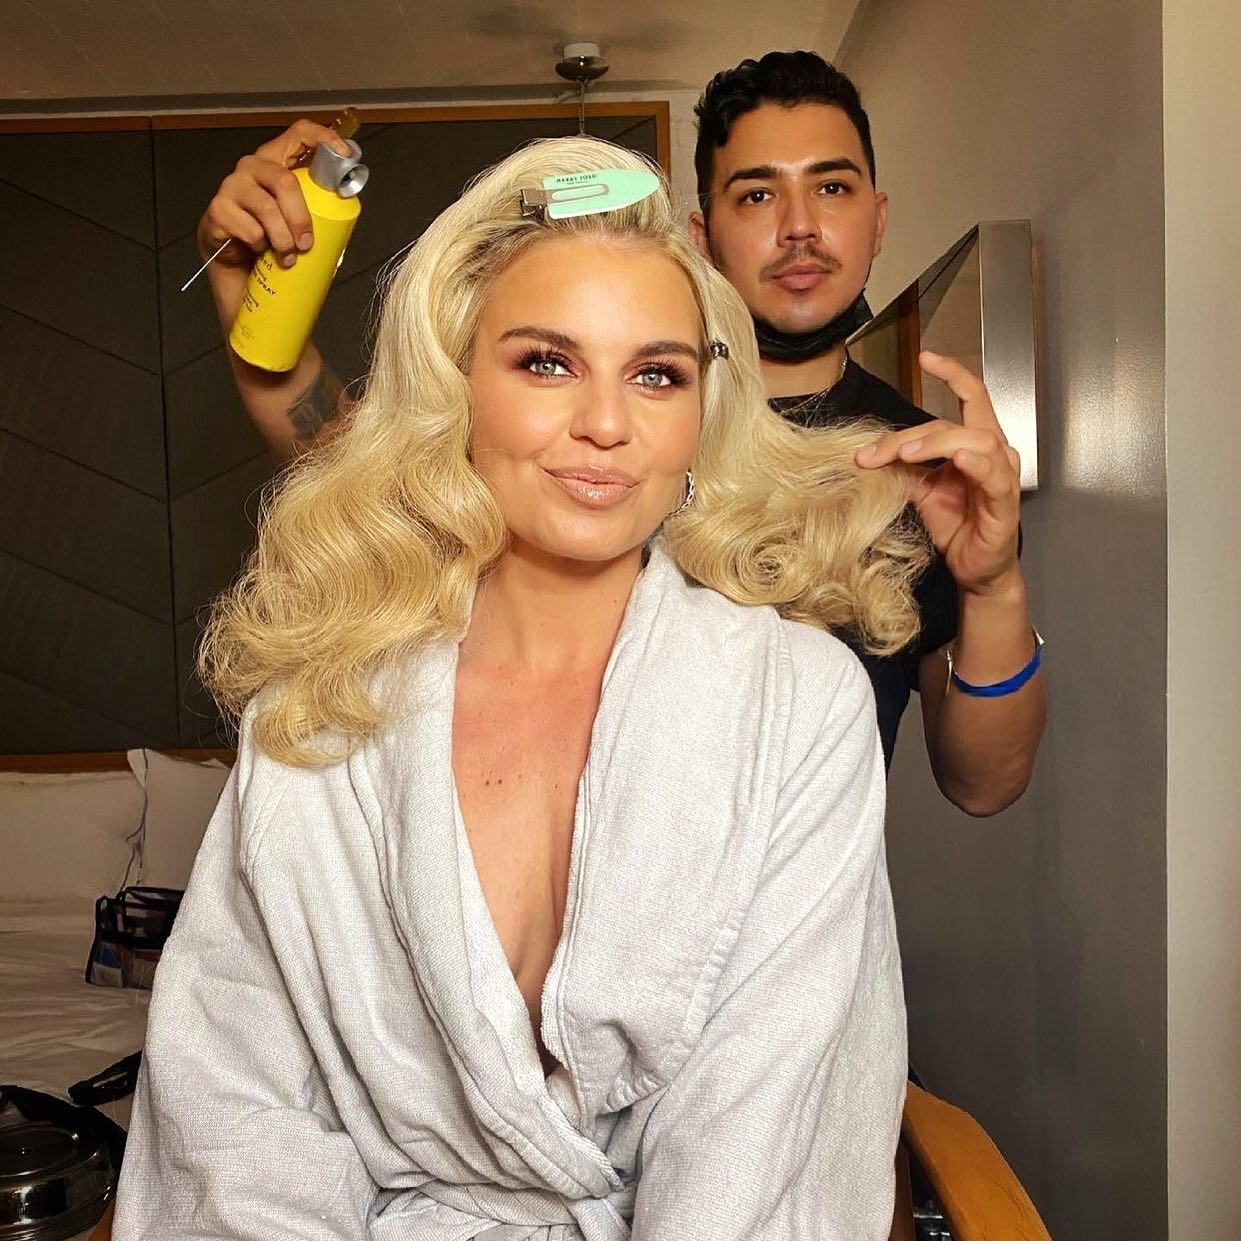 Old Hollywood Hair Glam anyone?? 

A little BTS of the incredible @jaysonmedinahair working his magic on the beautiful @tanyarad 

#repost from @jaysonmedinahair 

The newest go to hair-accessory- The Wigstension&trade;️

.
.
.
#hair #glamhair #blond